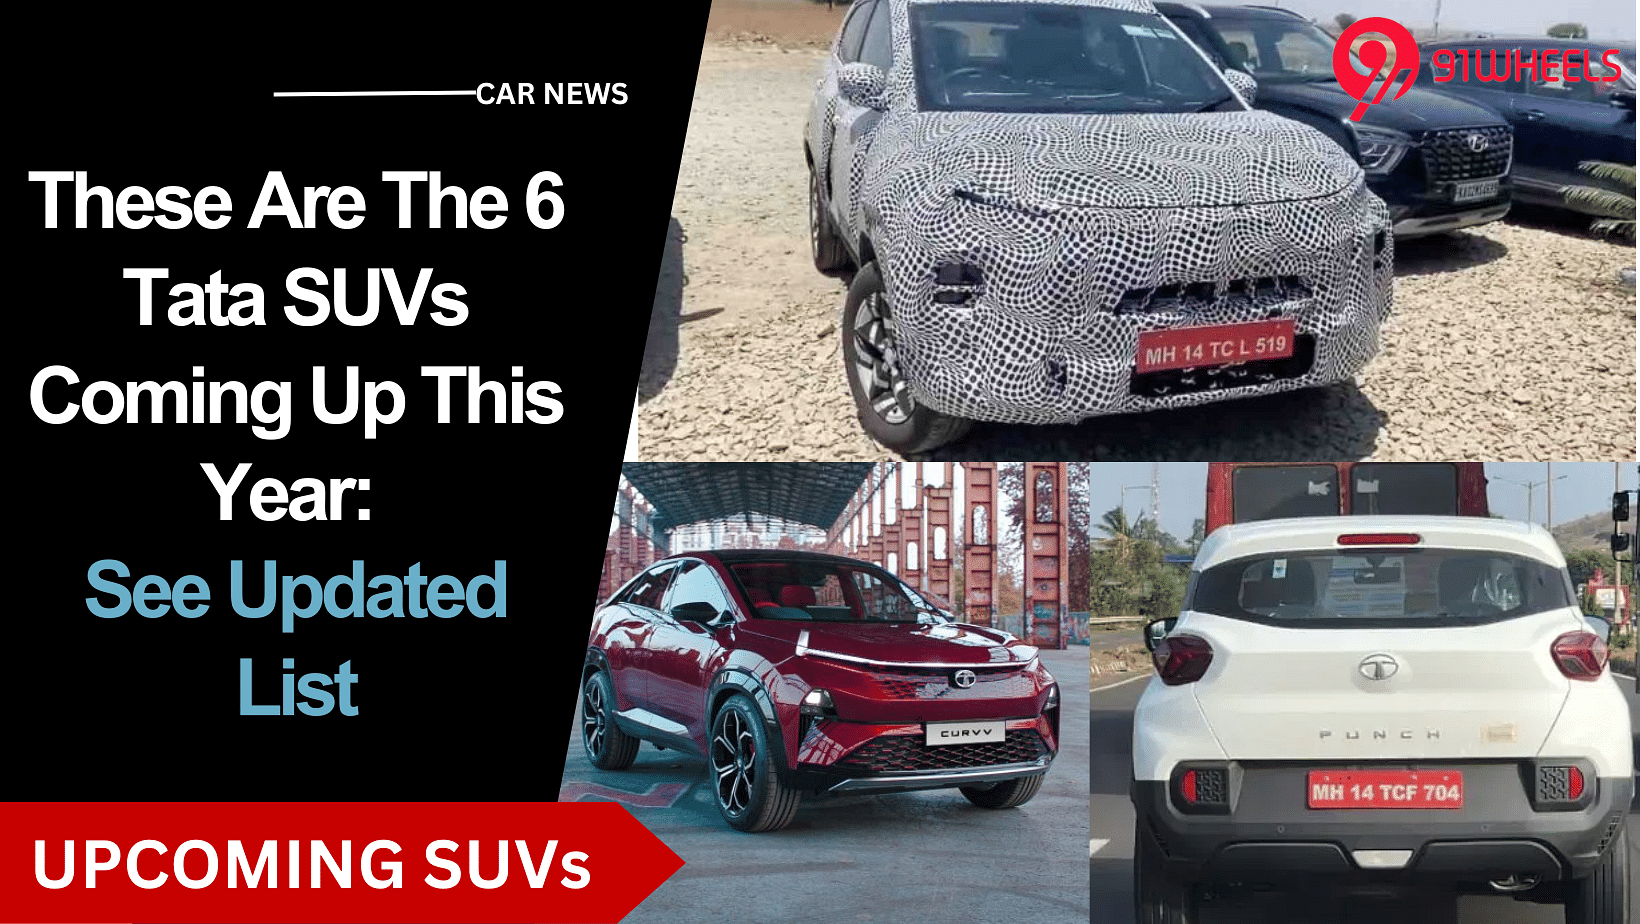 These Are The 6 Tata SUVs Coming Up This Year: See Updated List